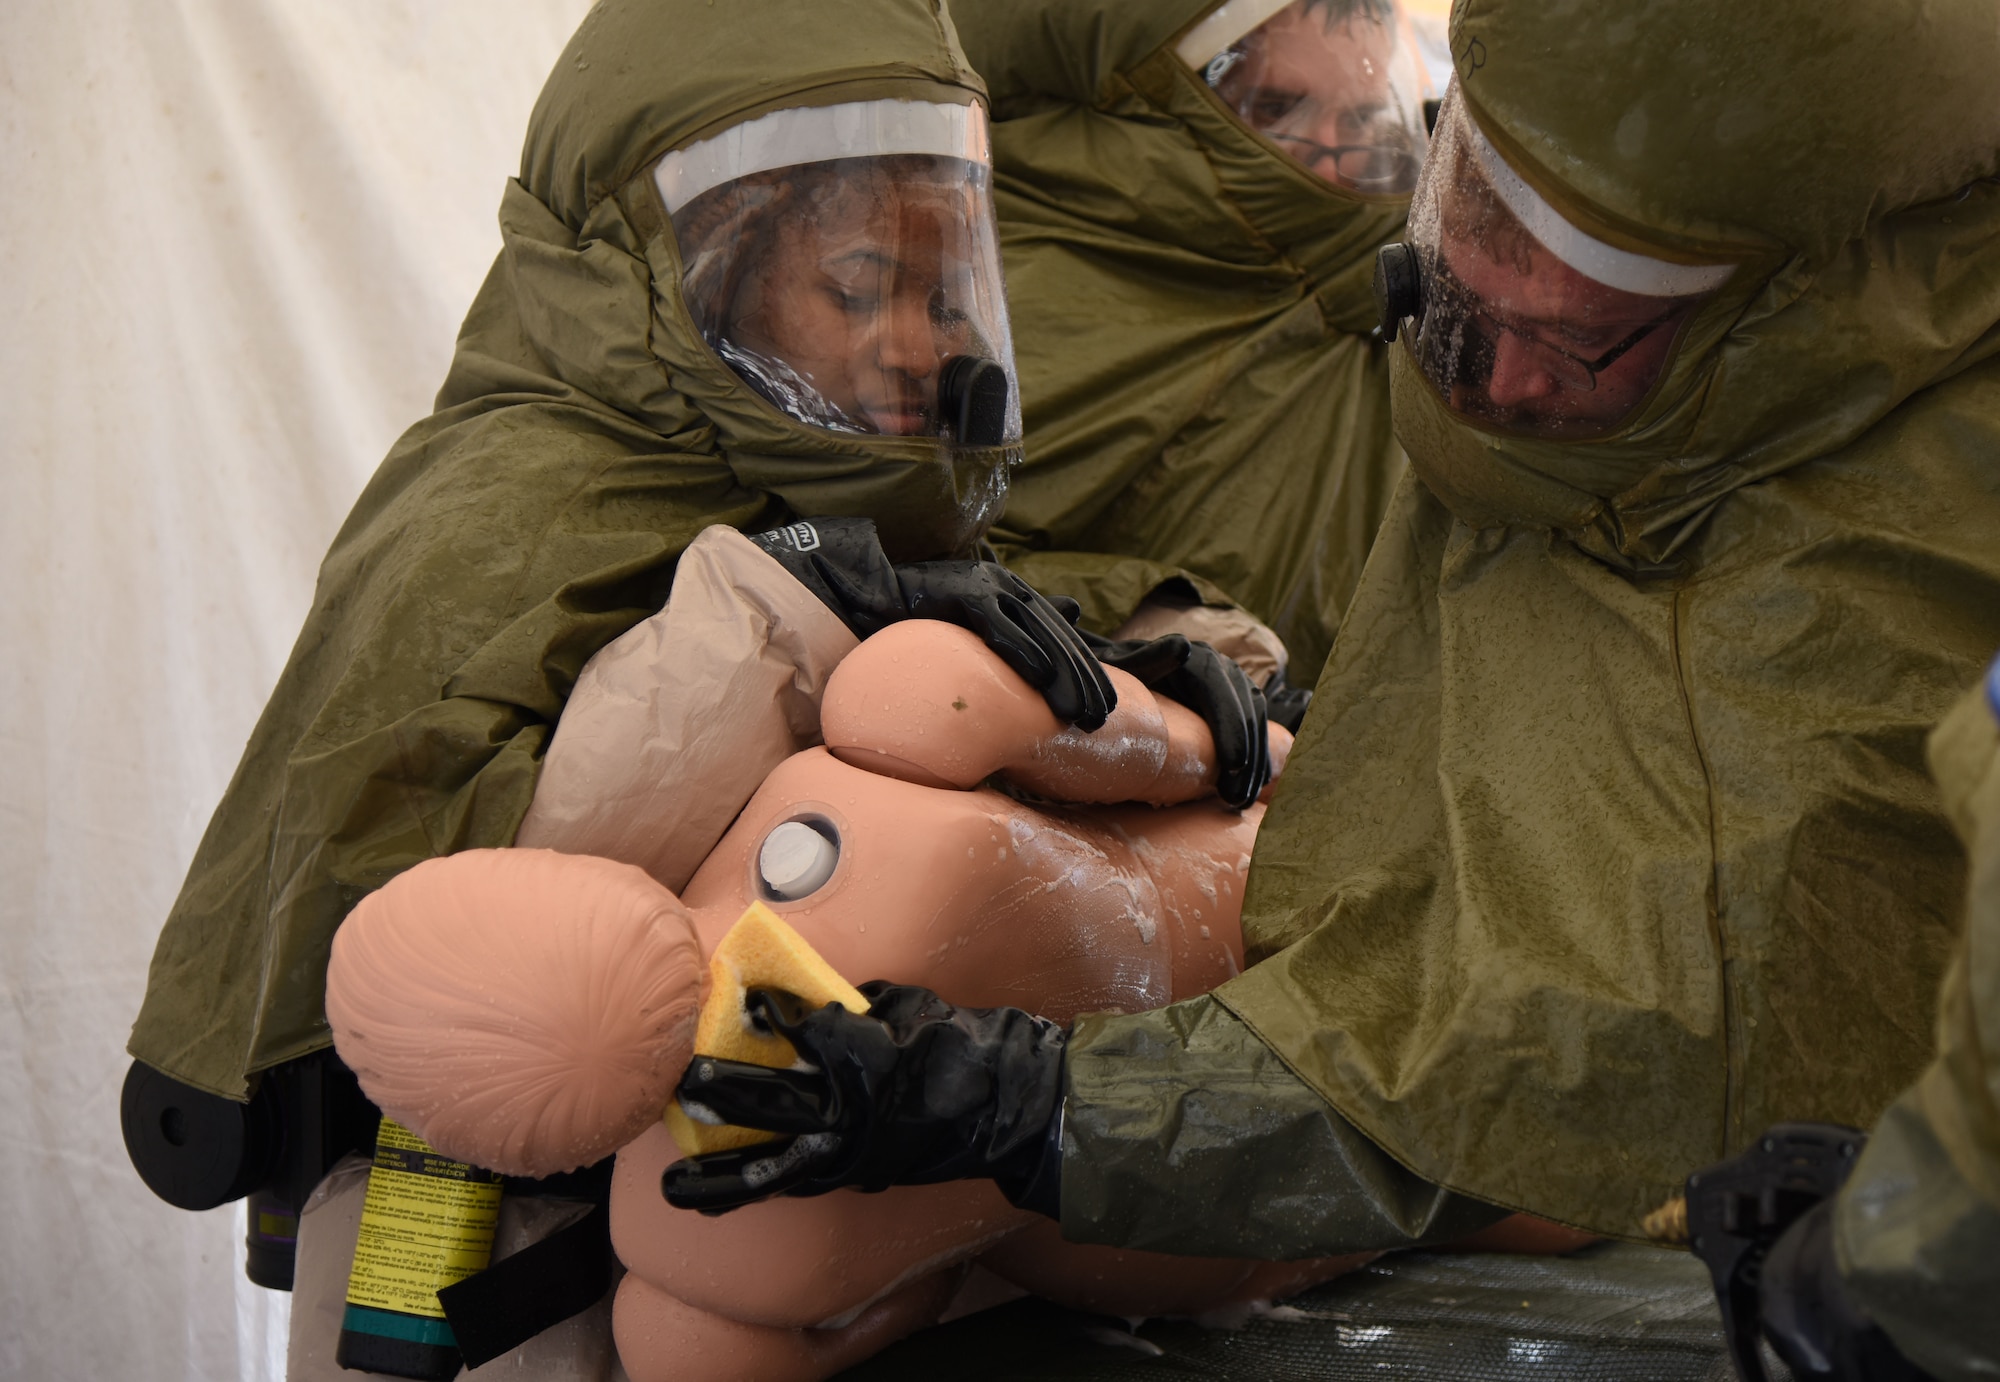 Airman 1st Class D’Asia Nelson-Clark, 81st Surgical Operations Squadron surgical technician, and Airman 1st Class Andrew Long, 81st MSGS ophthalmology technician, wash a “patient” as they are moved through a decontamination tent during the 81st Medical Group integrated in-place patient decontamination training course behind the Keesler Medical Center Sept. 14, 2017, on Keesler Air Force Base, Mississippi. The two-day course trained 21 personnel, which came from four different disaster medical teams: IPPD, triage, manpower and security. Throughout the training, they learned to utilize Keesler’s fixed decontamination facility and how to set up and tear down the decontamination tent. (U.S. Air Force photo by Kemberly Groue)